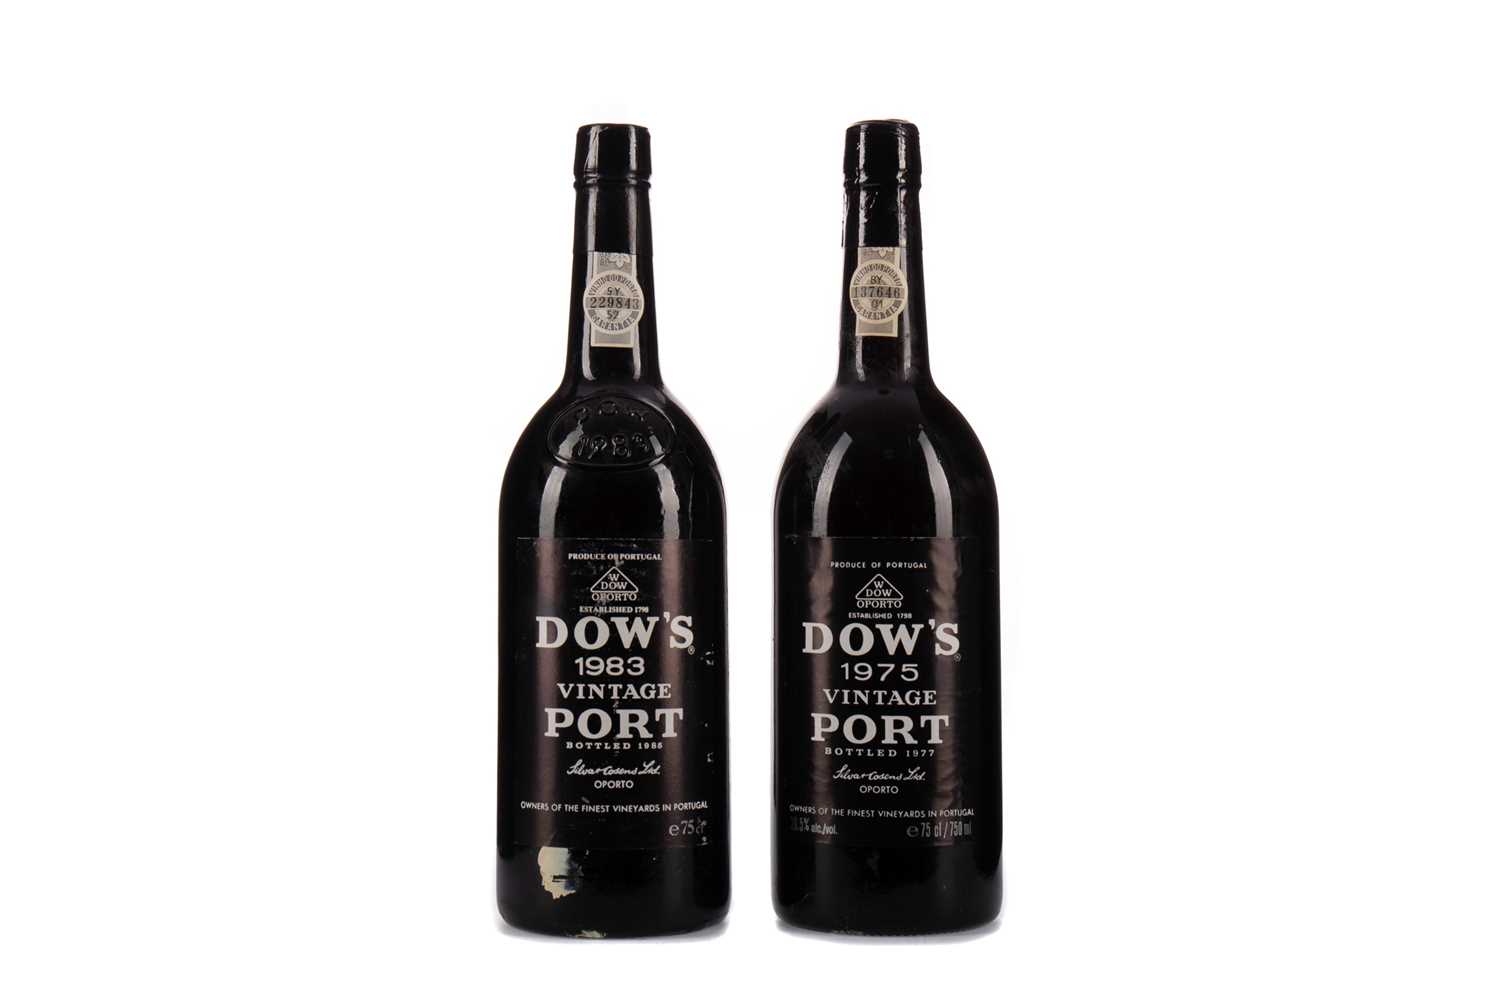 Lot 94 - DOW'S 1975 AND 1983 VINTAGE PORT